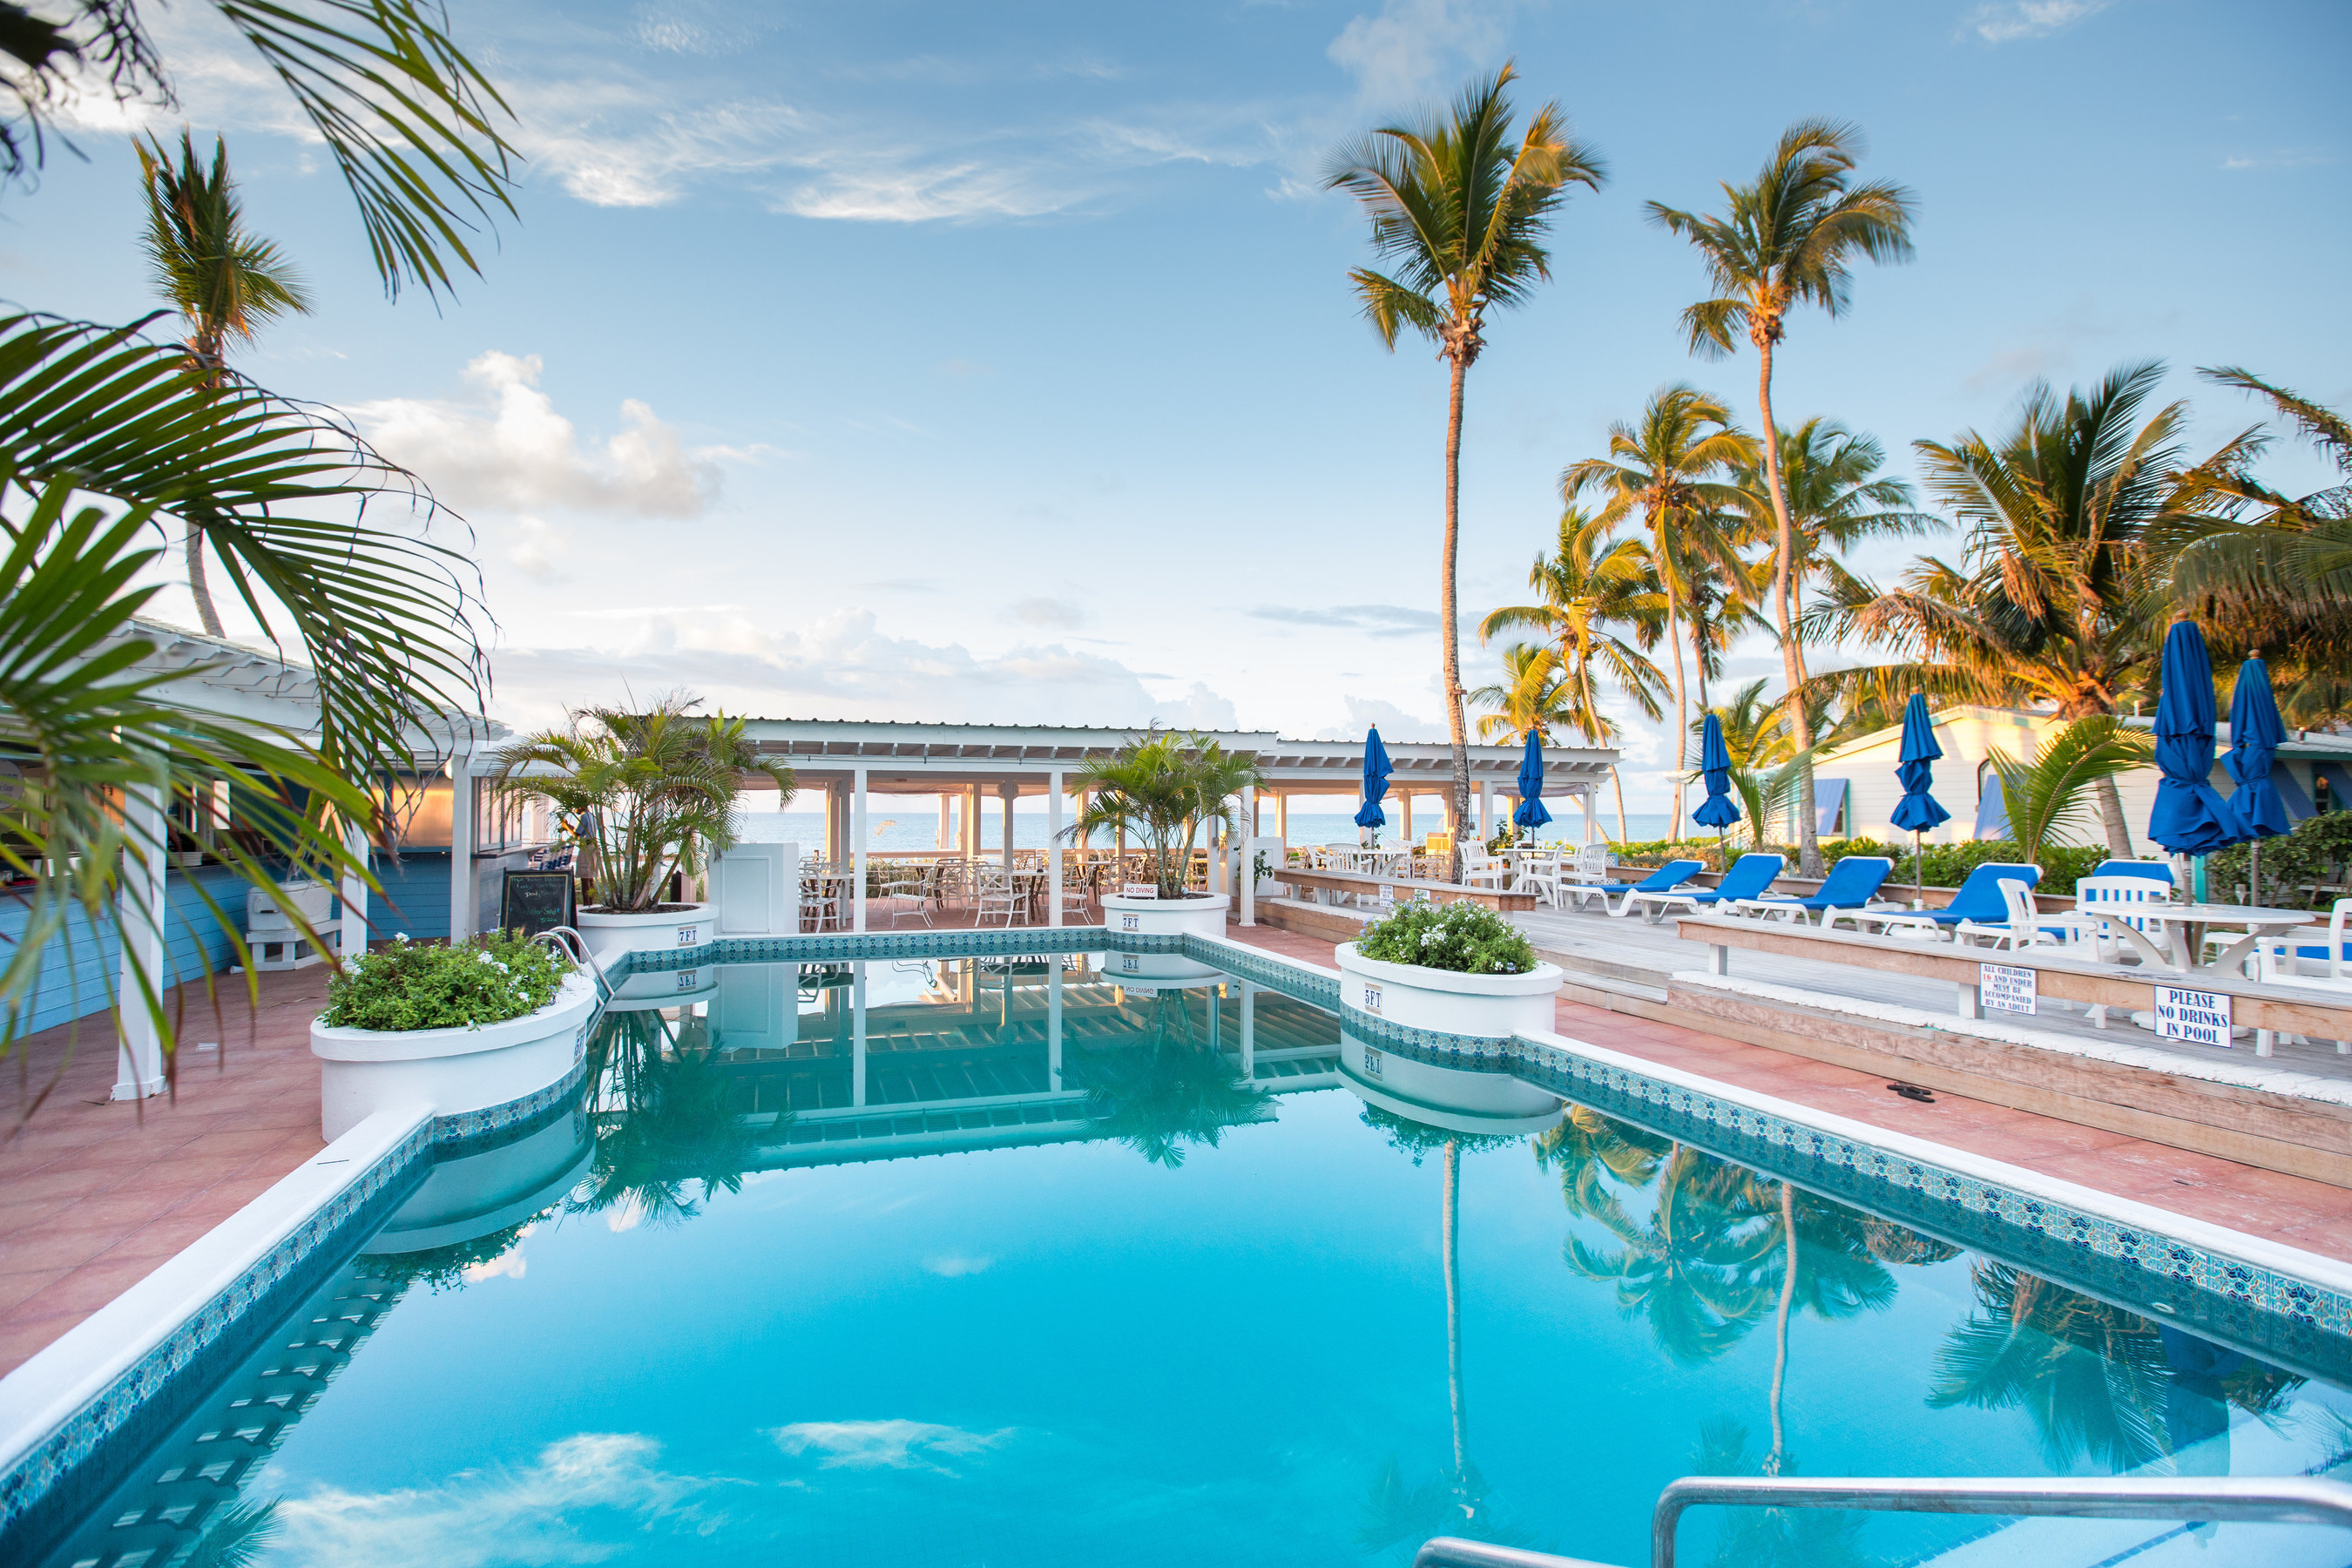 Hope Town Harbour Lodge in Abaco, Bahamas is a member of the Ascend Hotel Collection by Choice Hotels